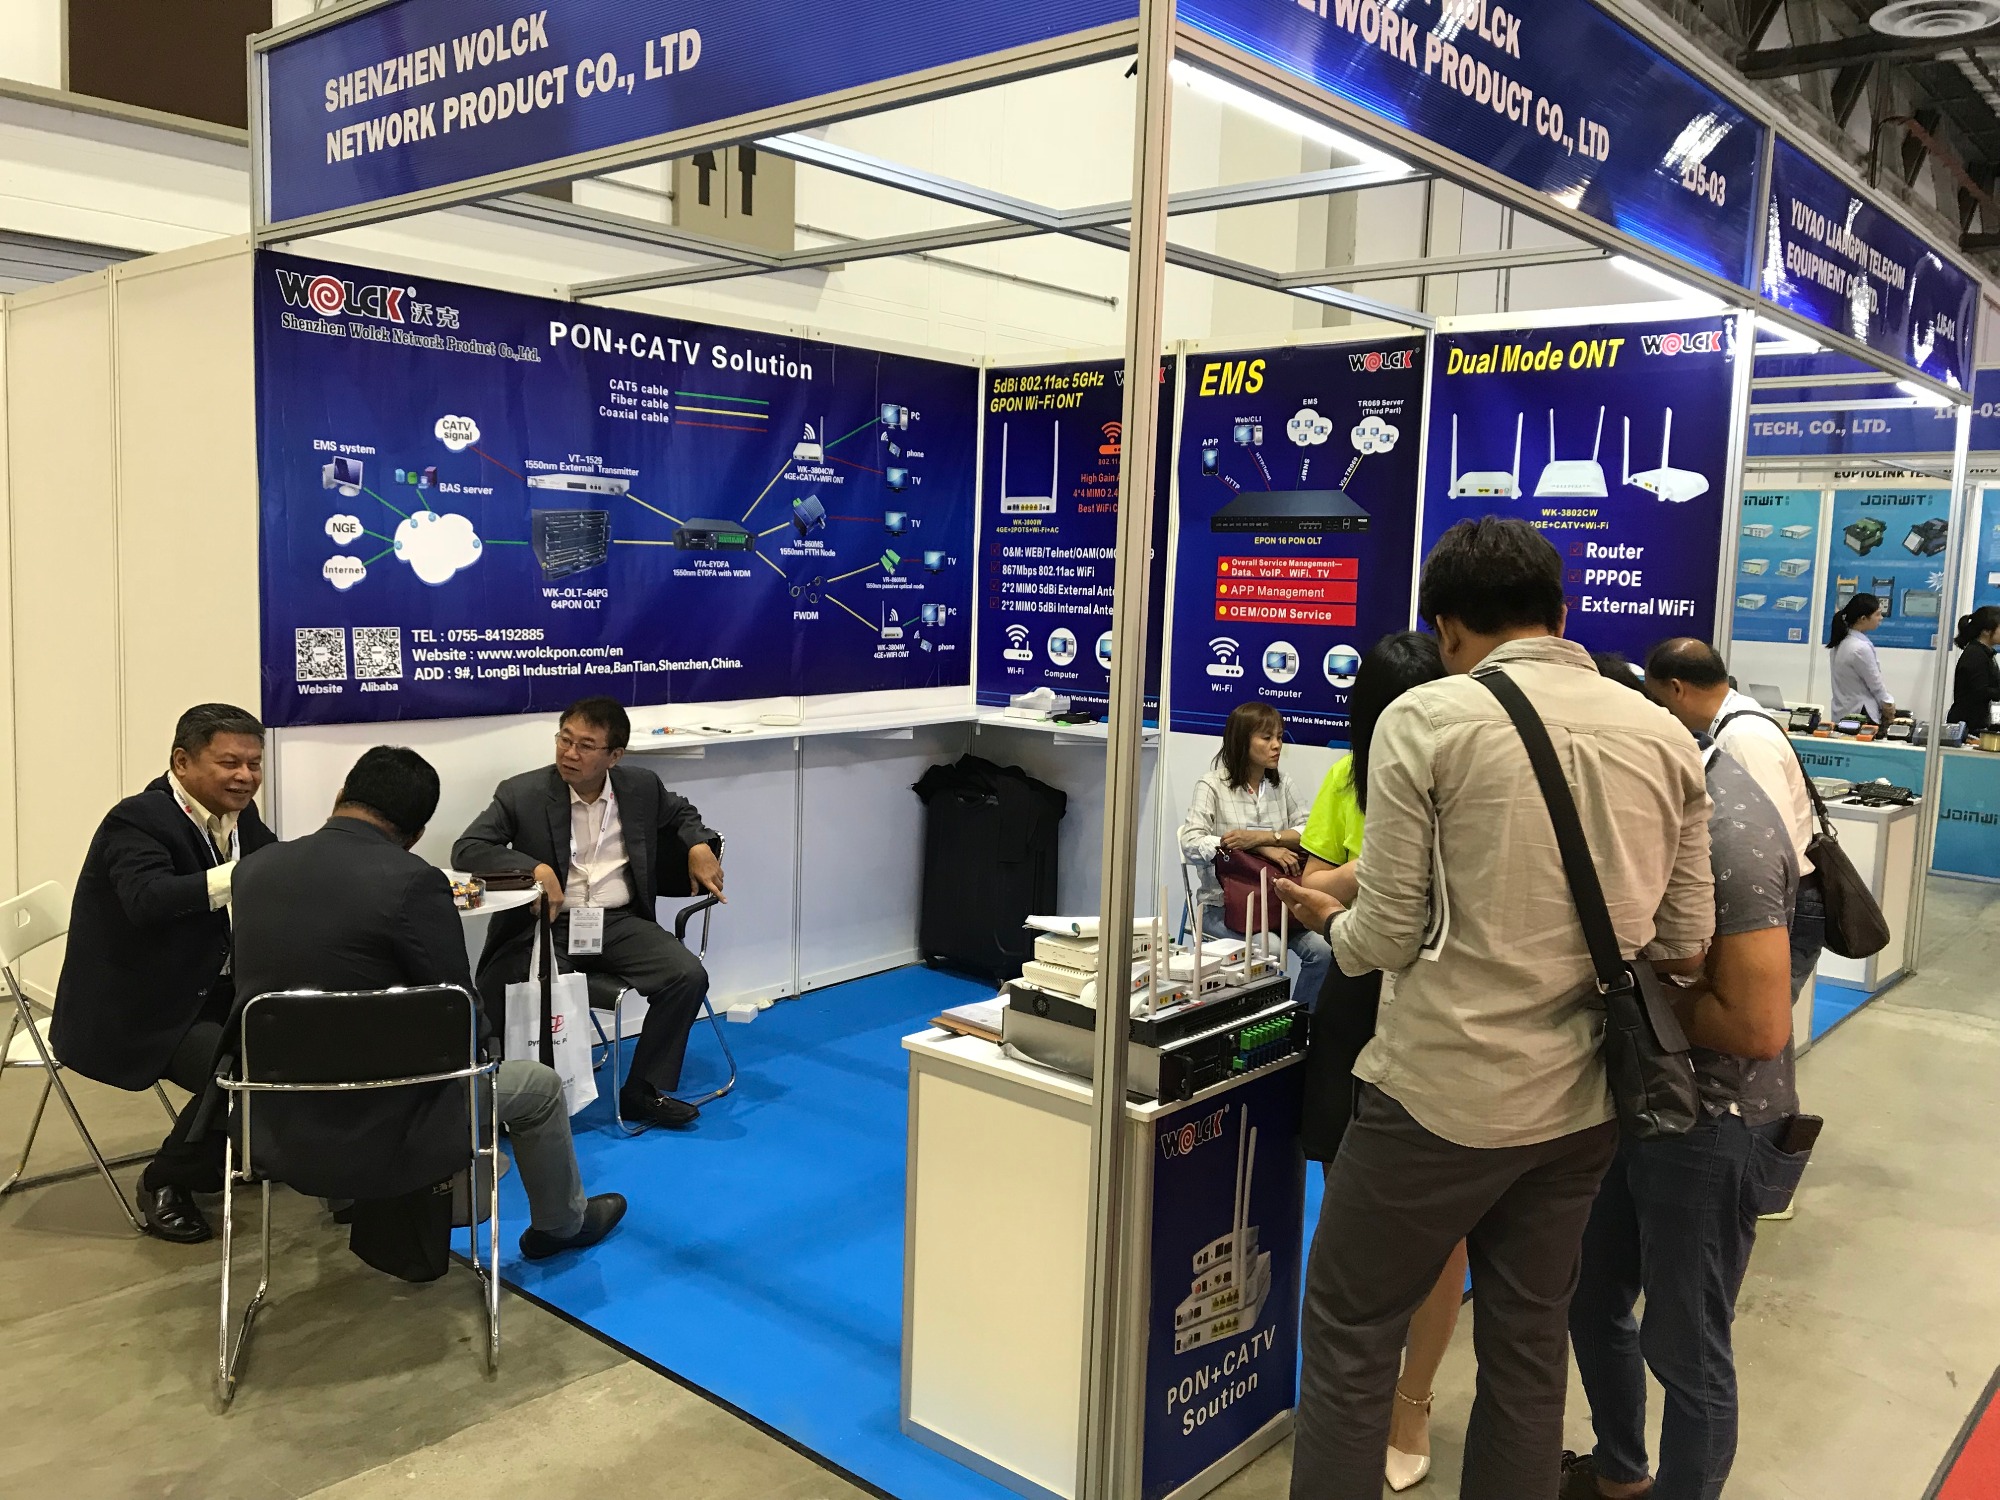 WOLCK took part in the CommunicAsia 2018 event in Singapore